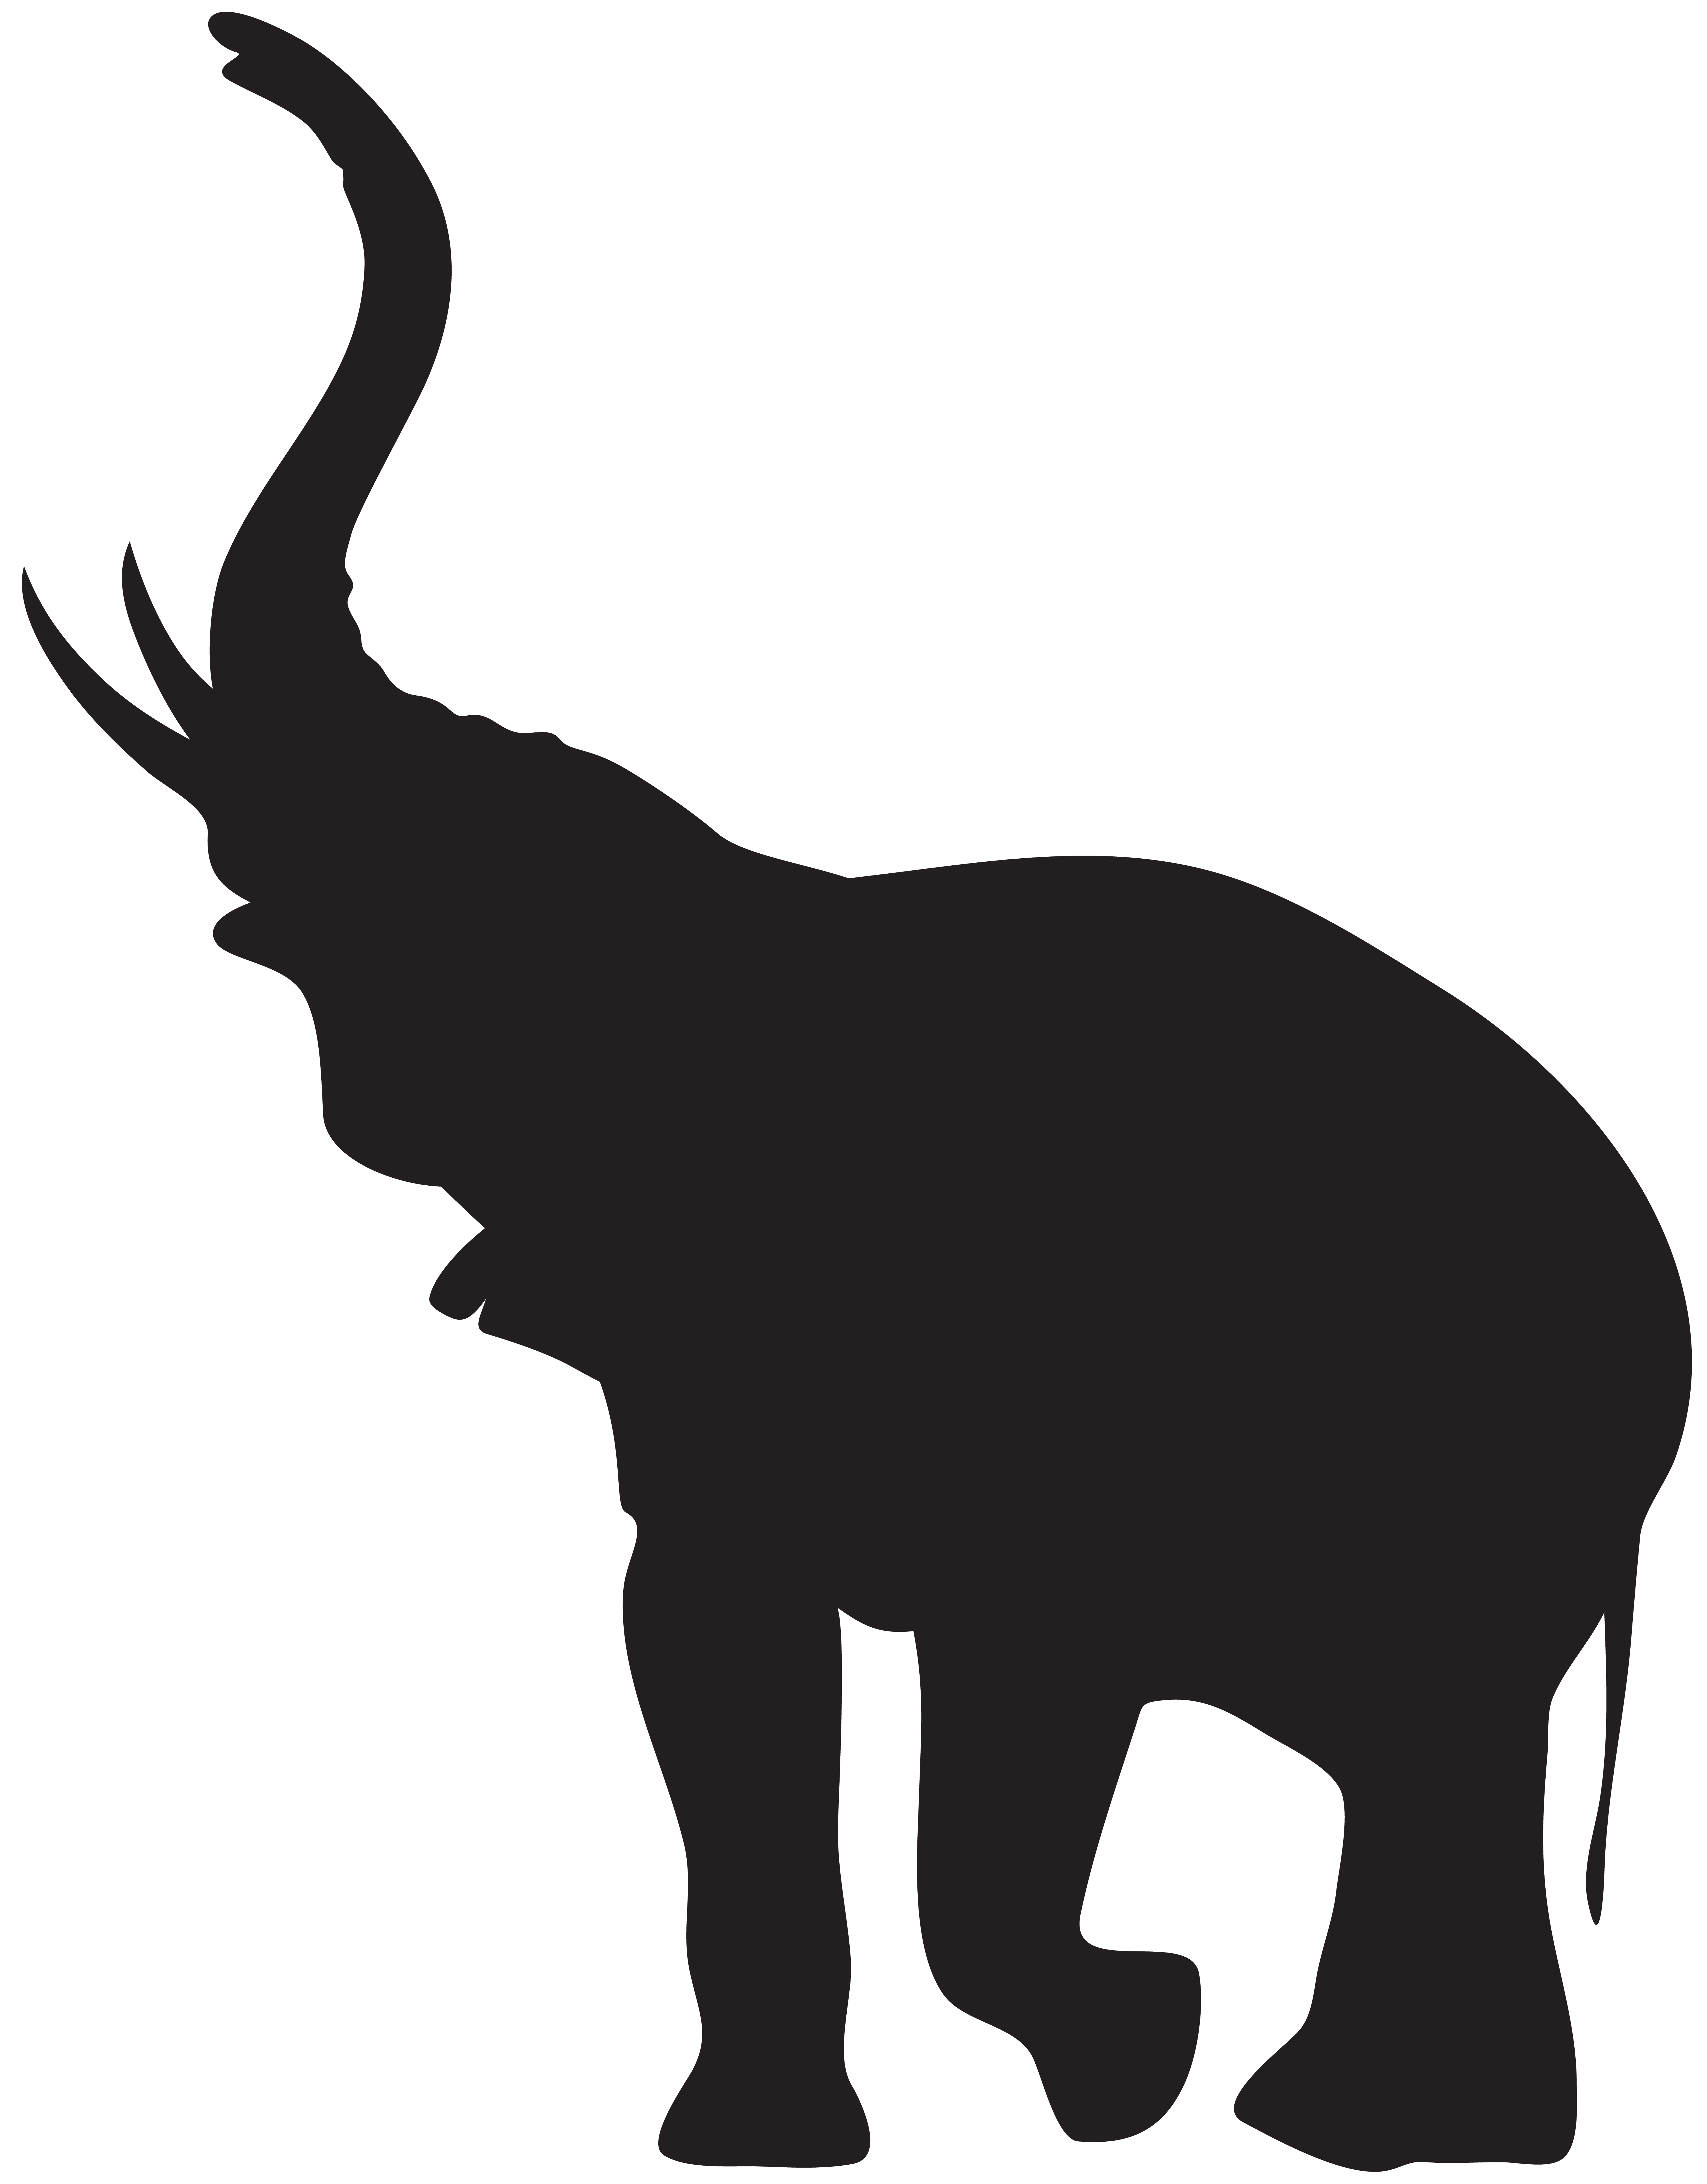 Elephant with Trunk Raised Silhouette PNG Clip Art